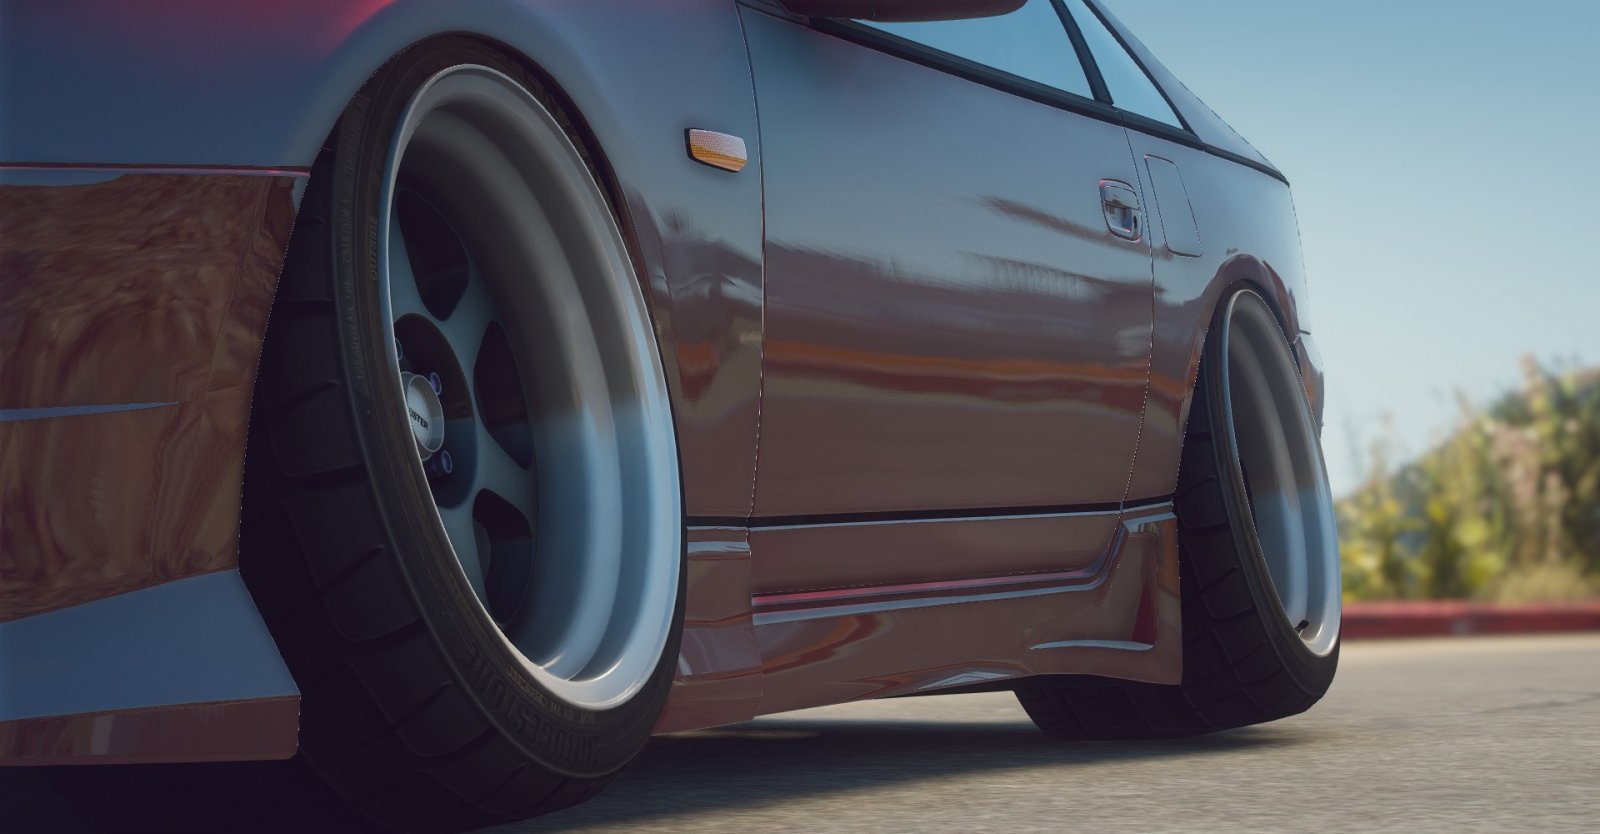 Stanced 300ZX Photo Shoot (3/6)